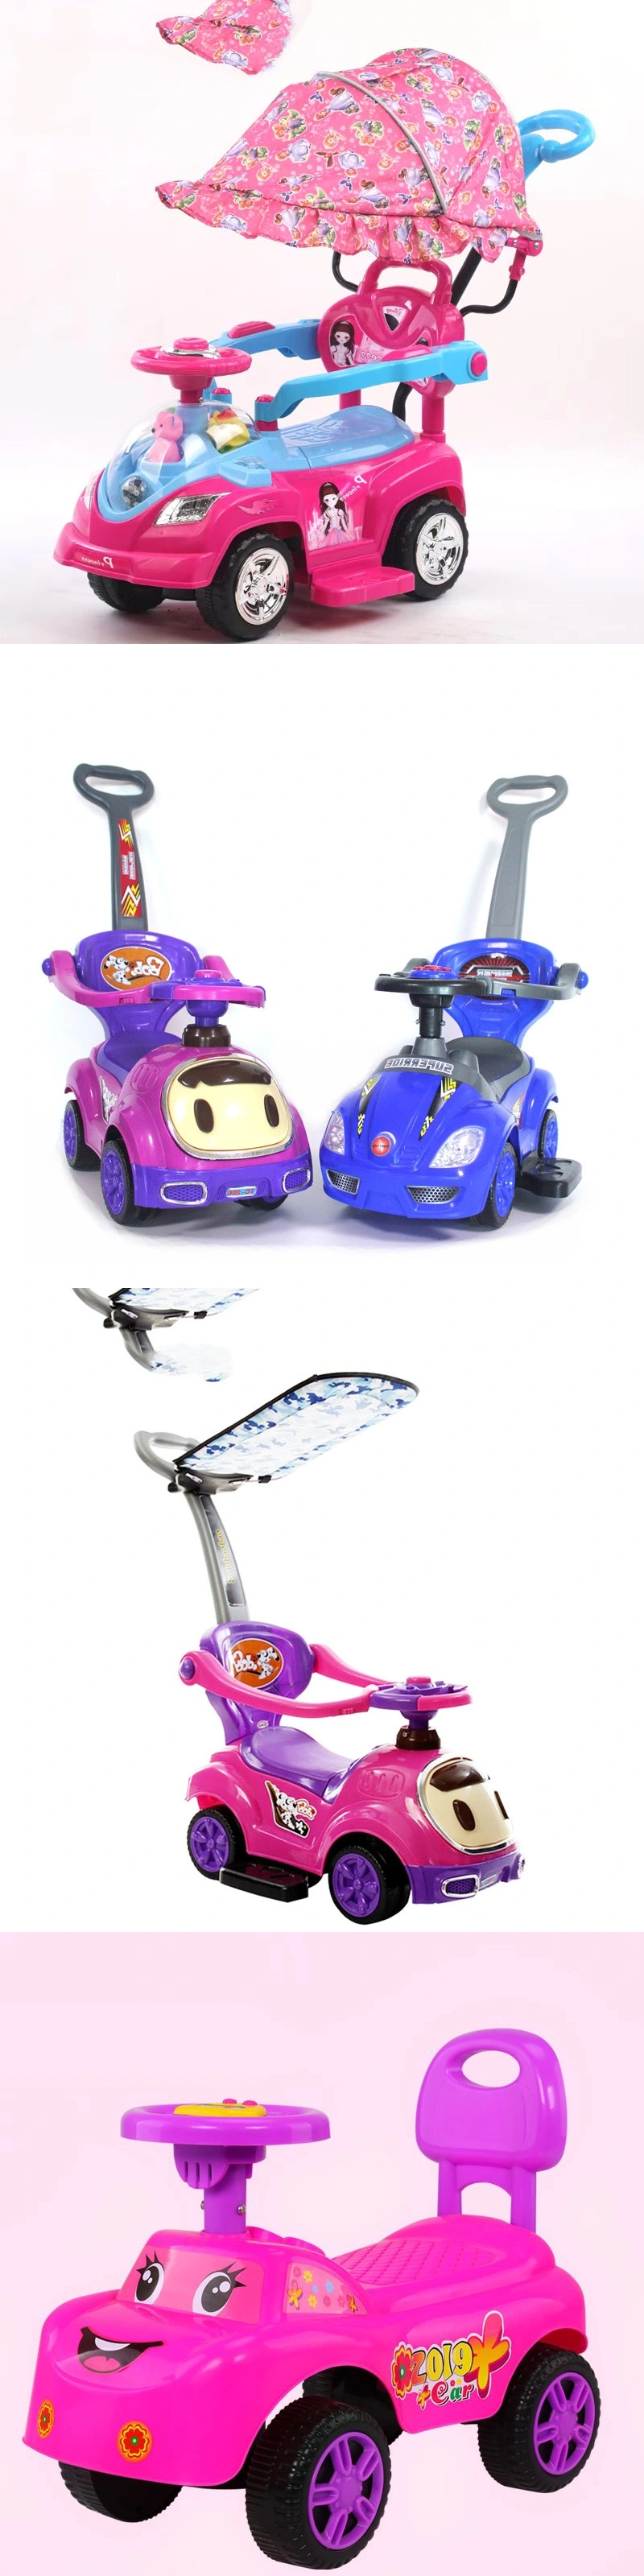 Hebei Factory Plastic Baby Push Cars for Kids Baby Ride on Push Magic Swing Cars 3 in 1 Deluxe Mega Car with Horn Music